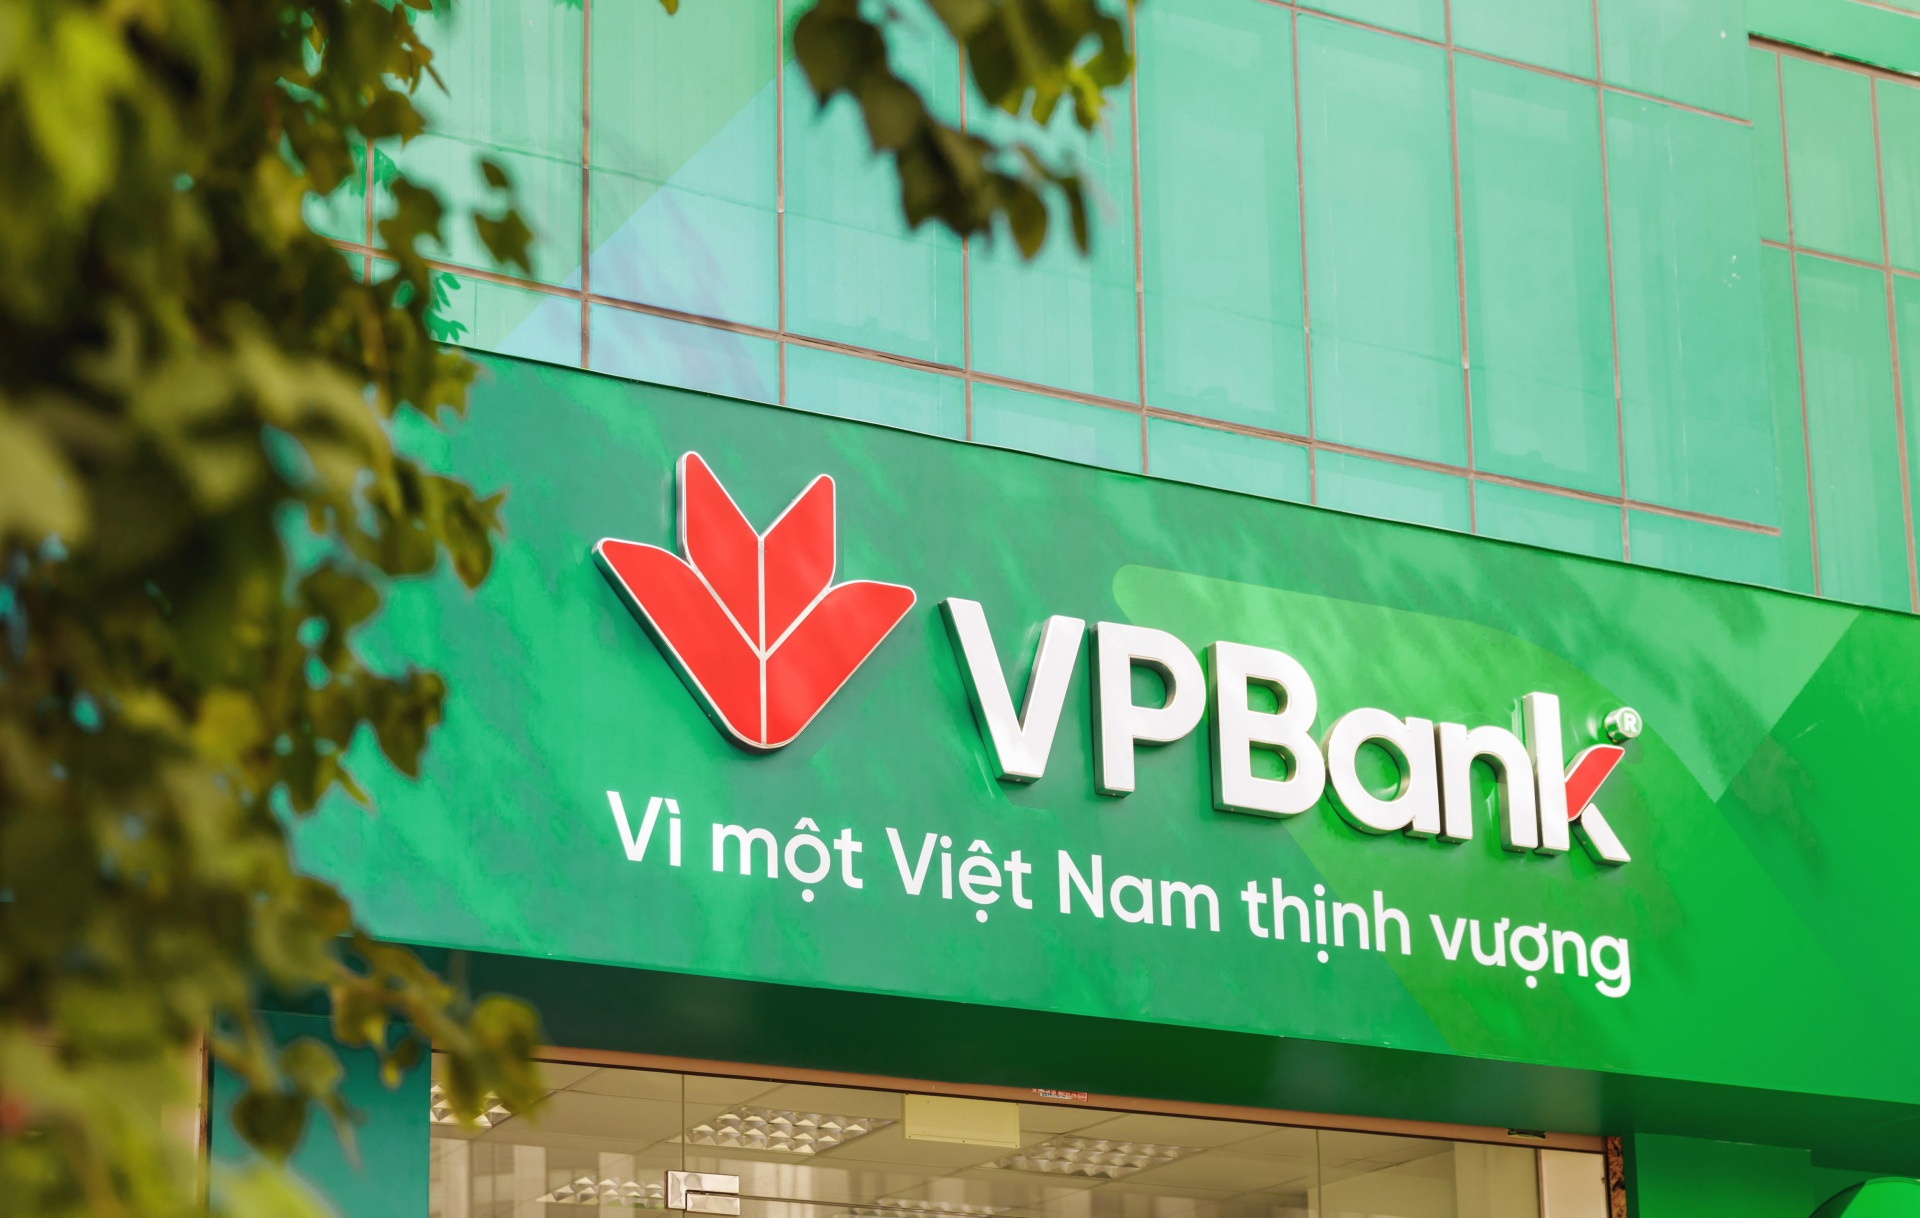 VPBank plans compulsory acquisition of struggling credit institution